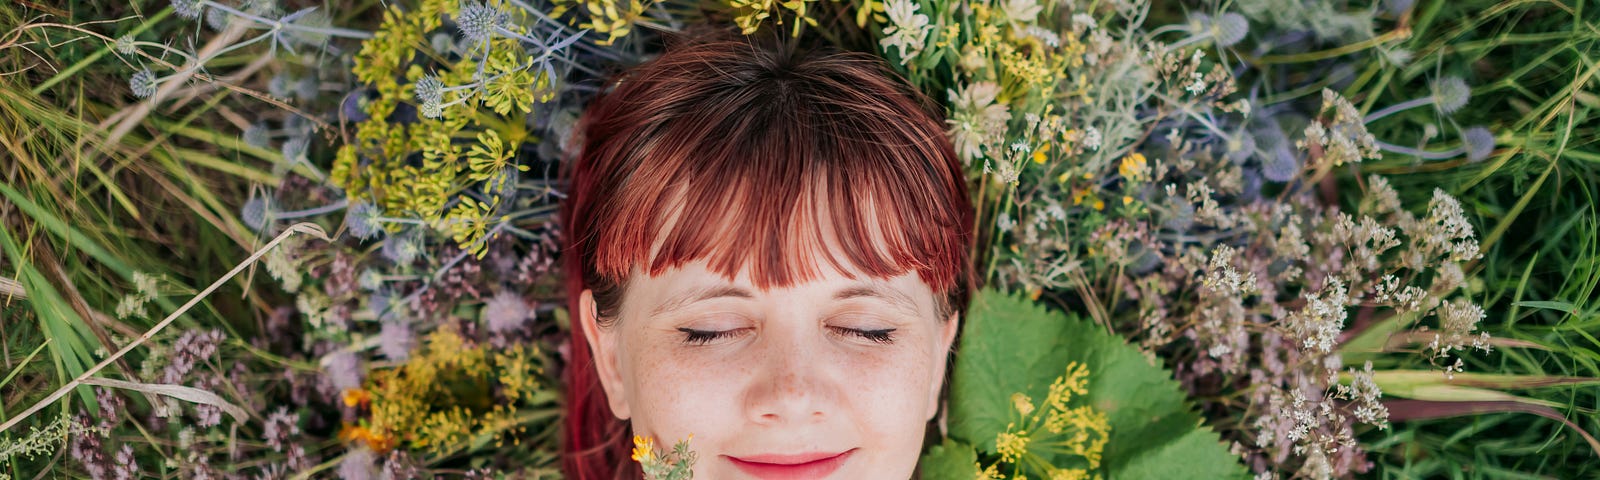 A woman relaxes peacefully surrounded by flowers